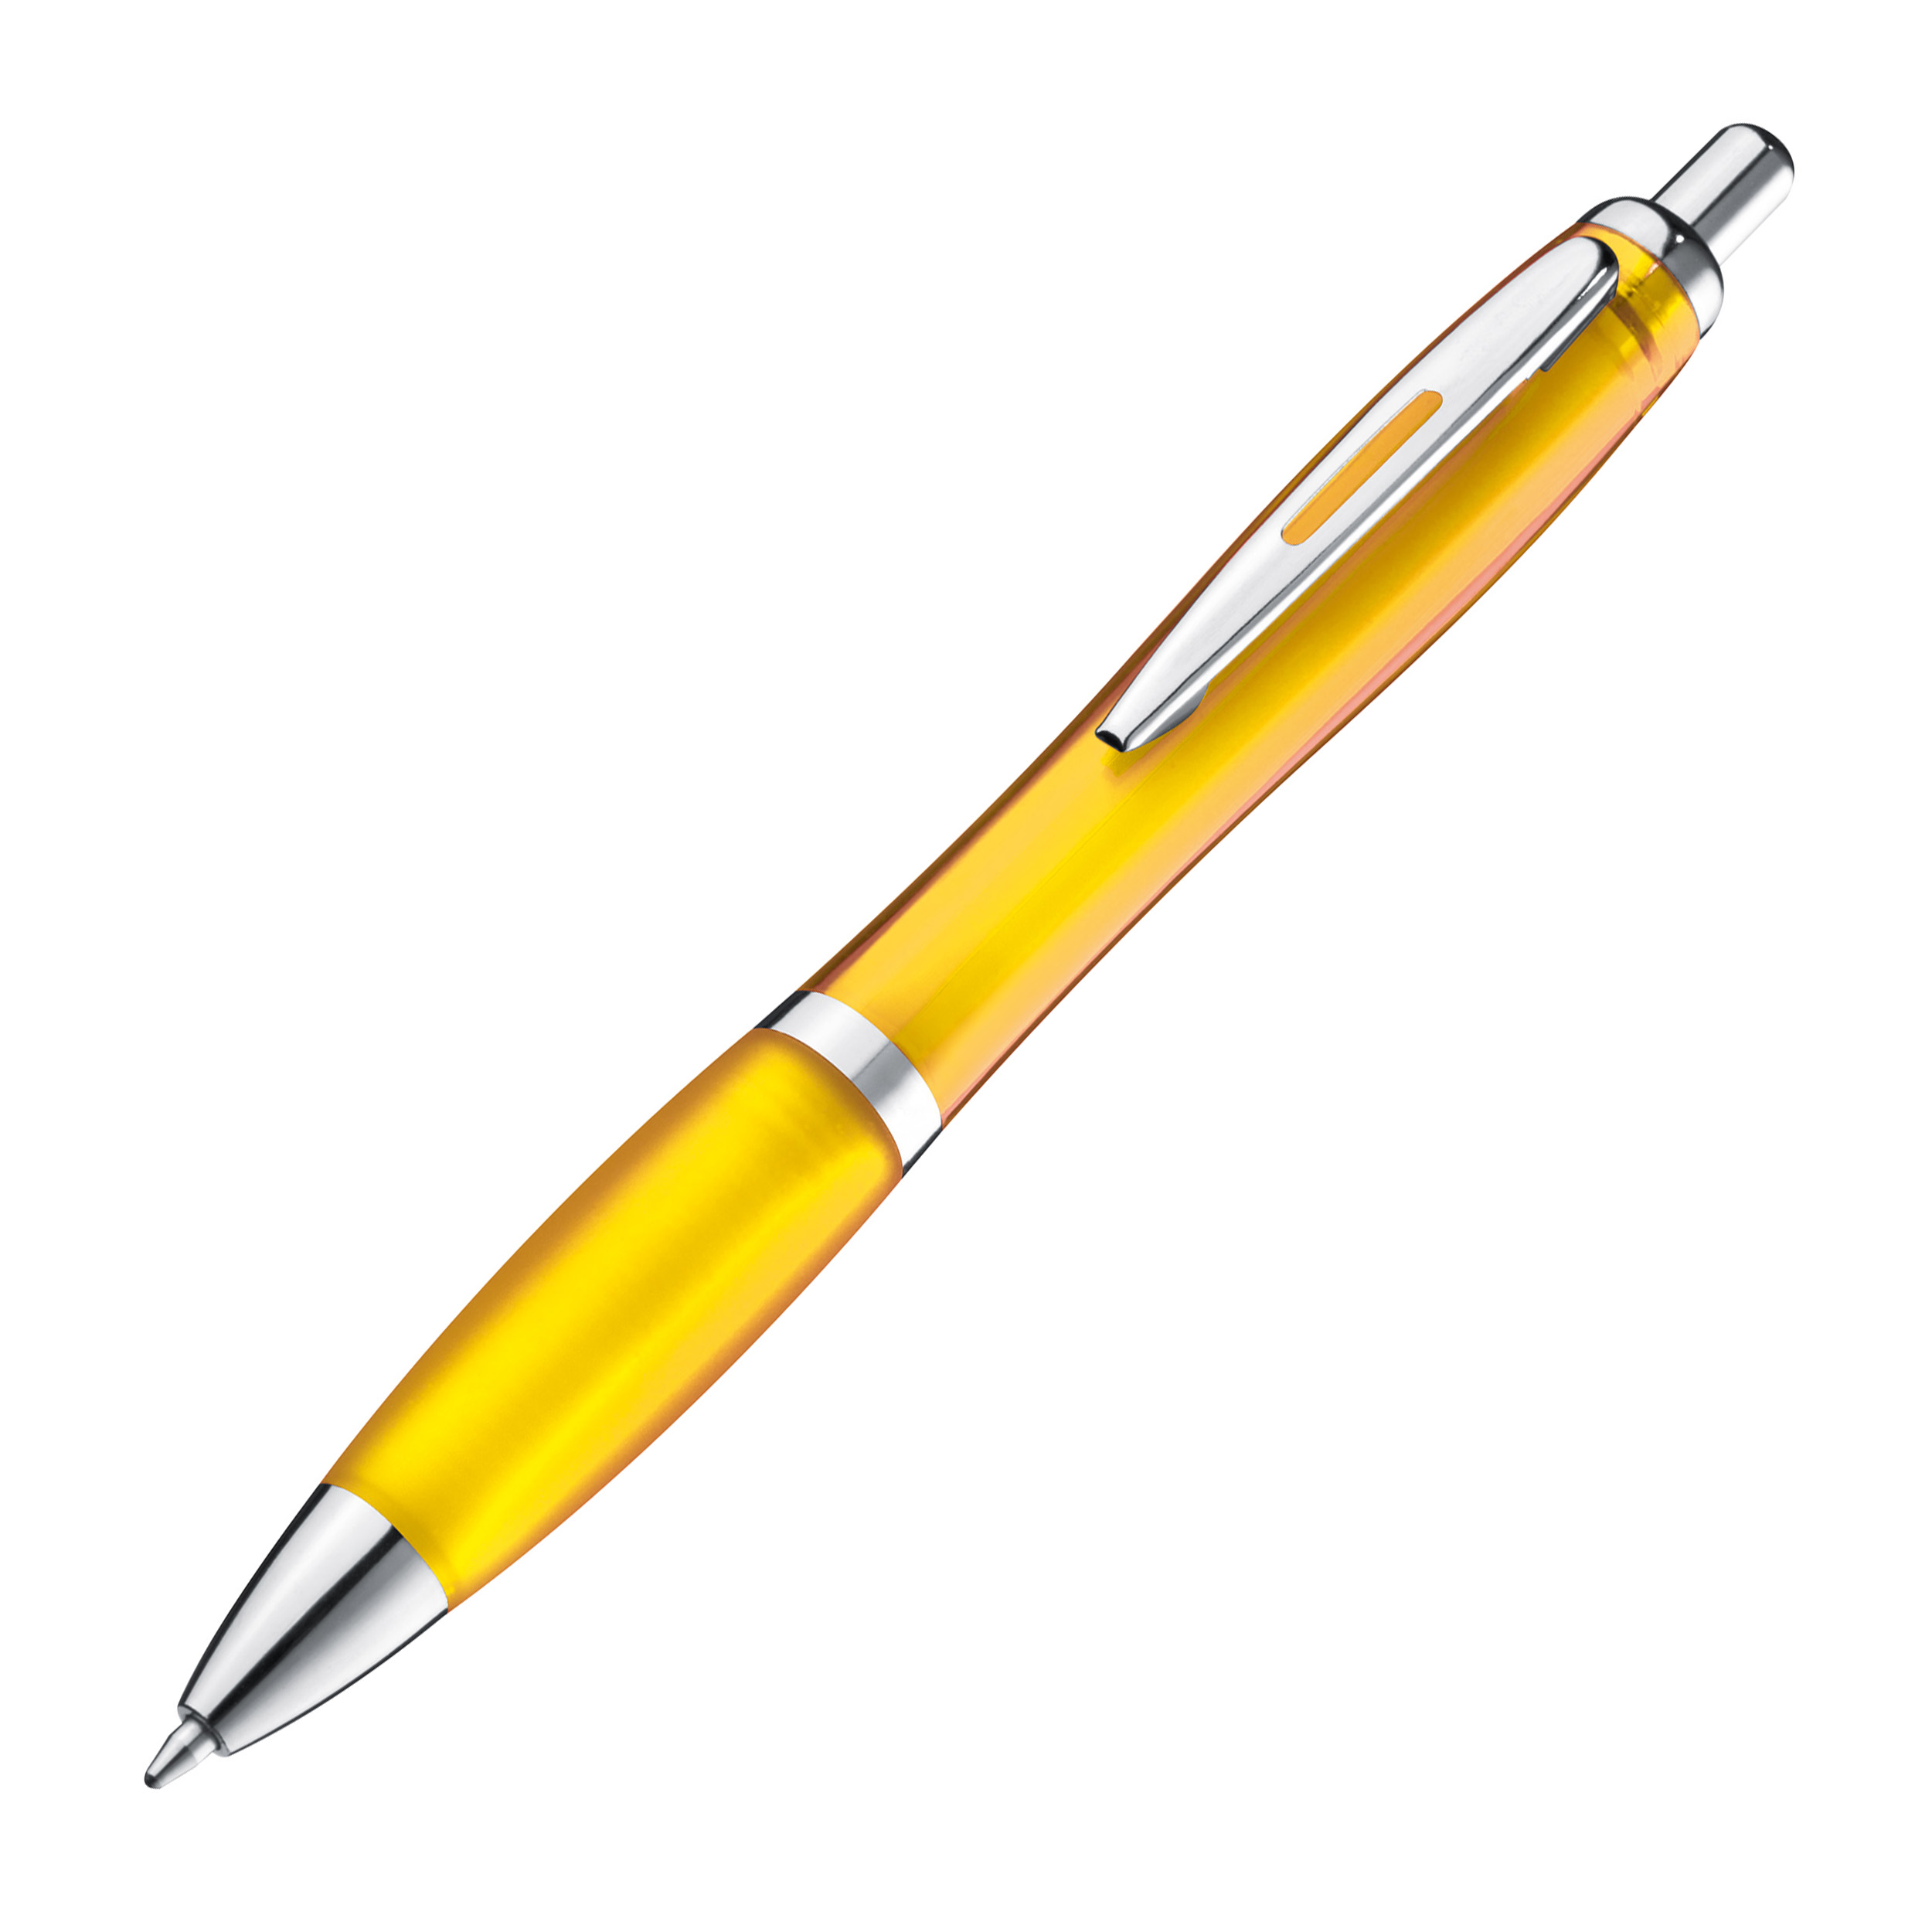 Transparent ball pen with rubber grip